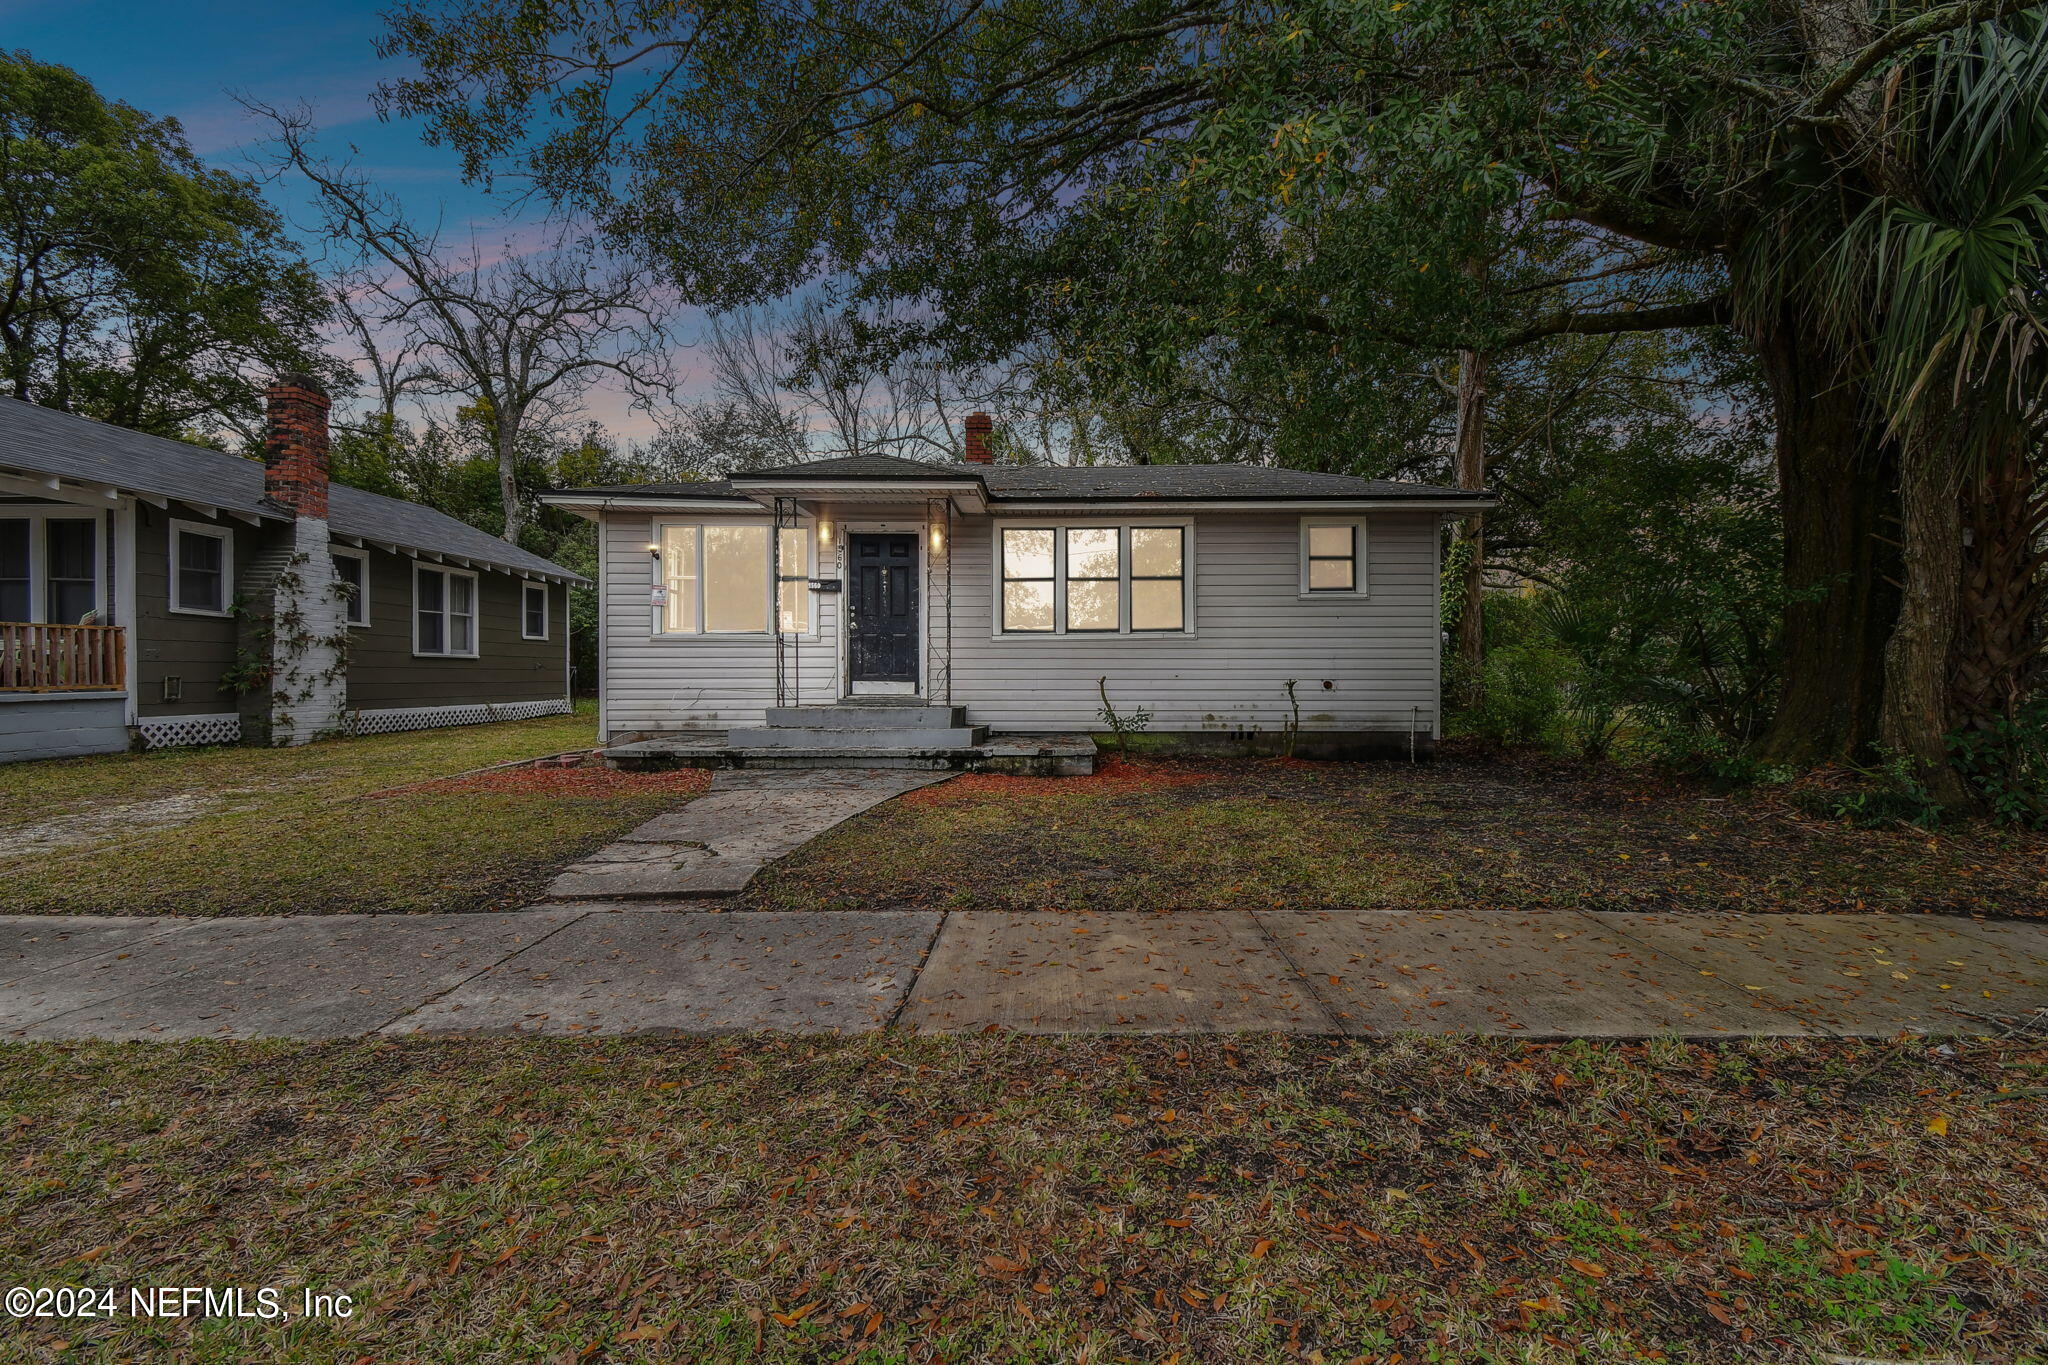 Jacksonville, FL home for sale located at 1560 W 19th Street, Jacksonville, FL 32209